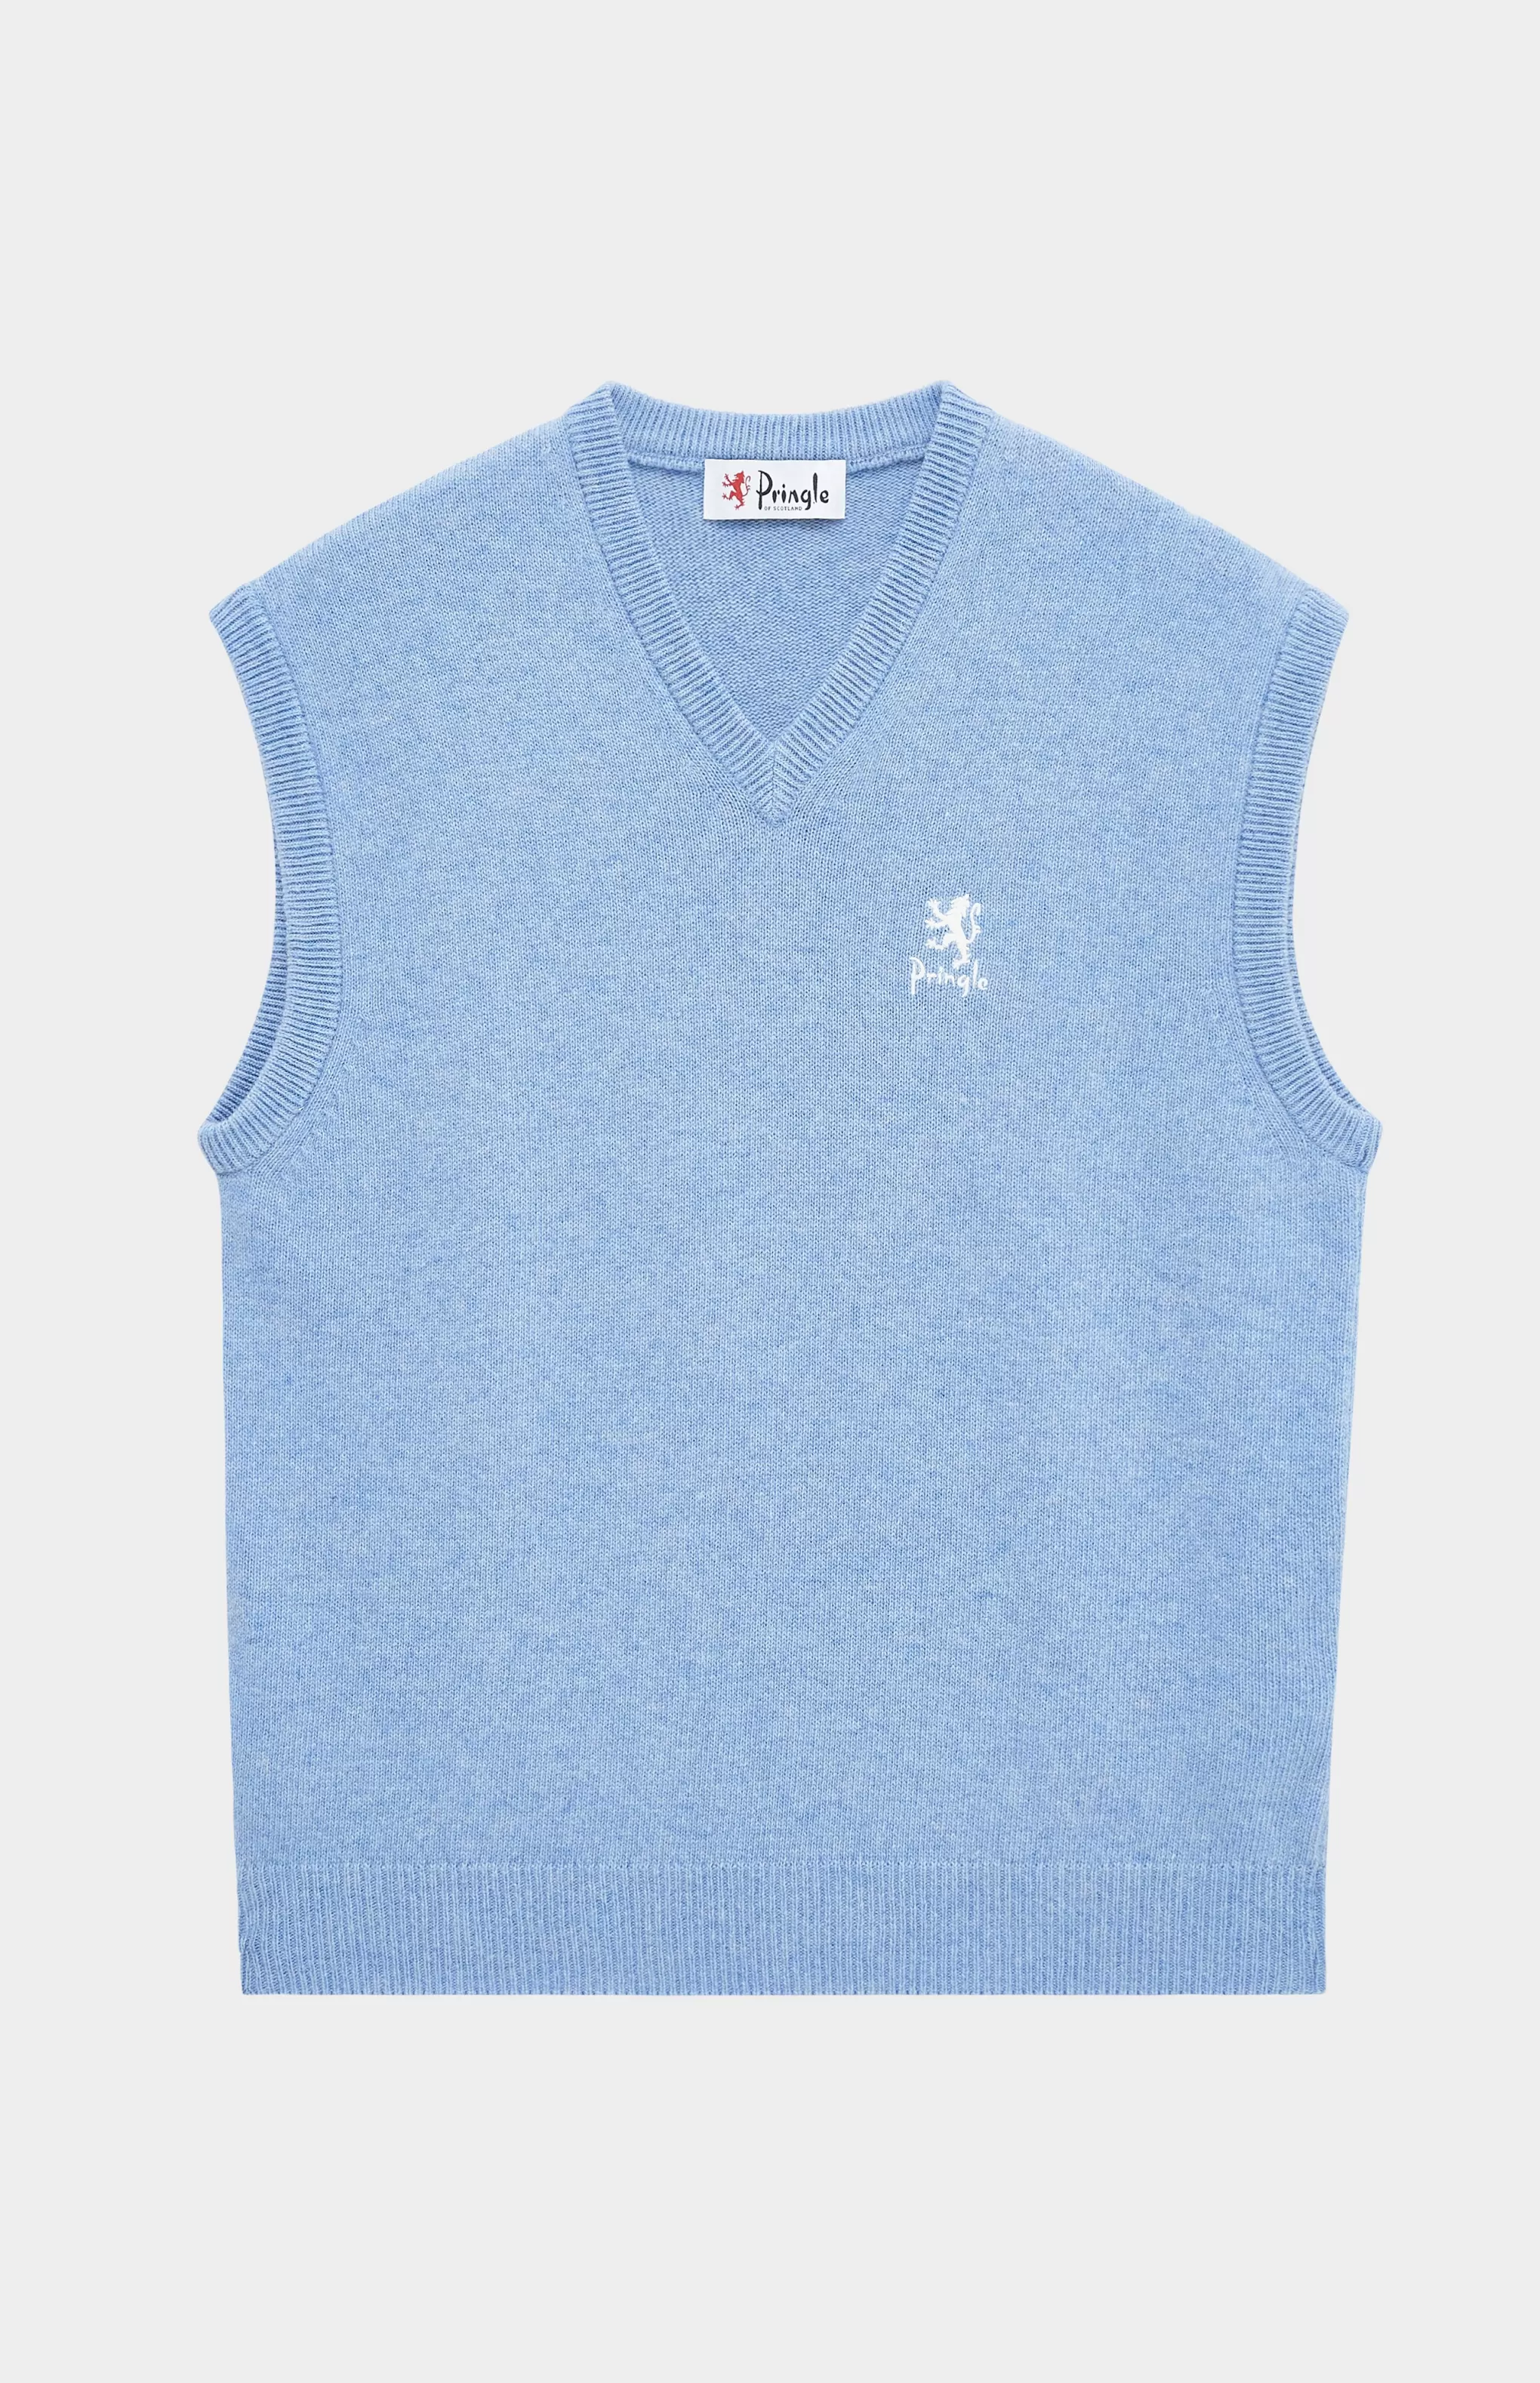 Store Unisex Archive Lambswool Blend Vest In Carolina Blue Men Pringle Heritage Unisex Collections